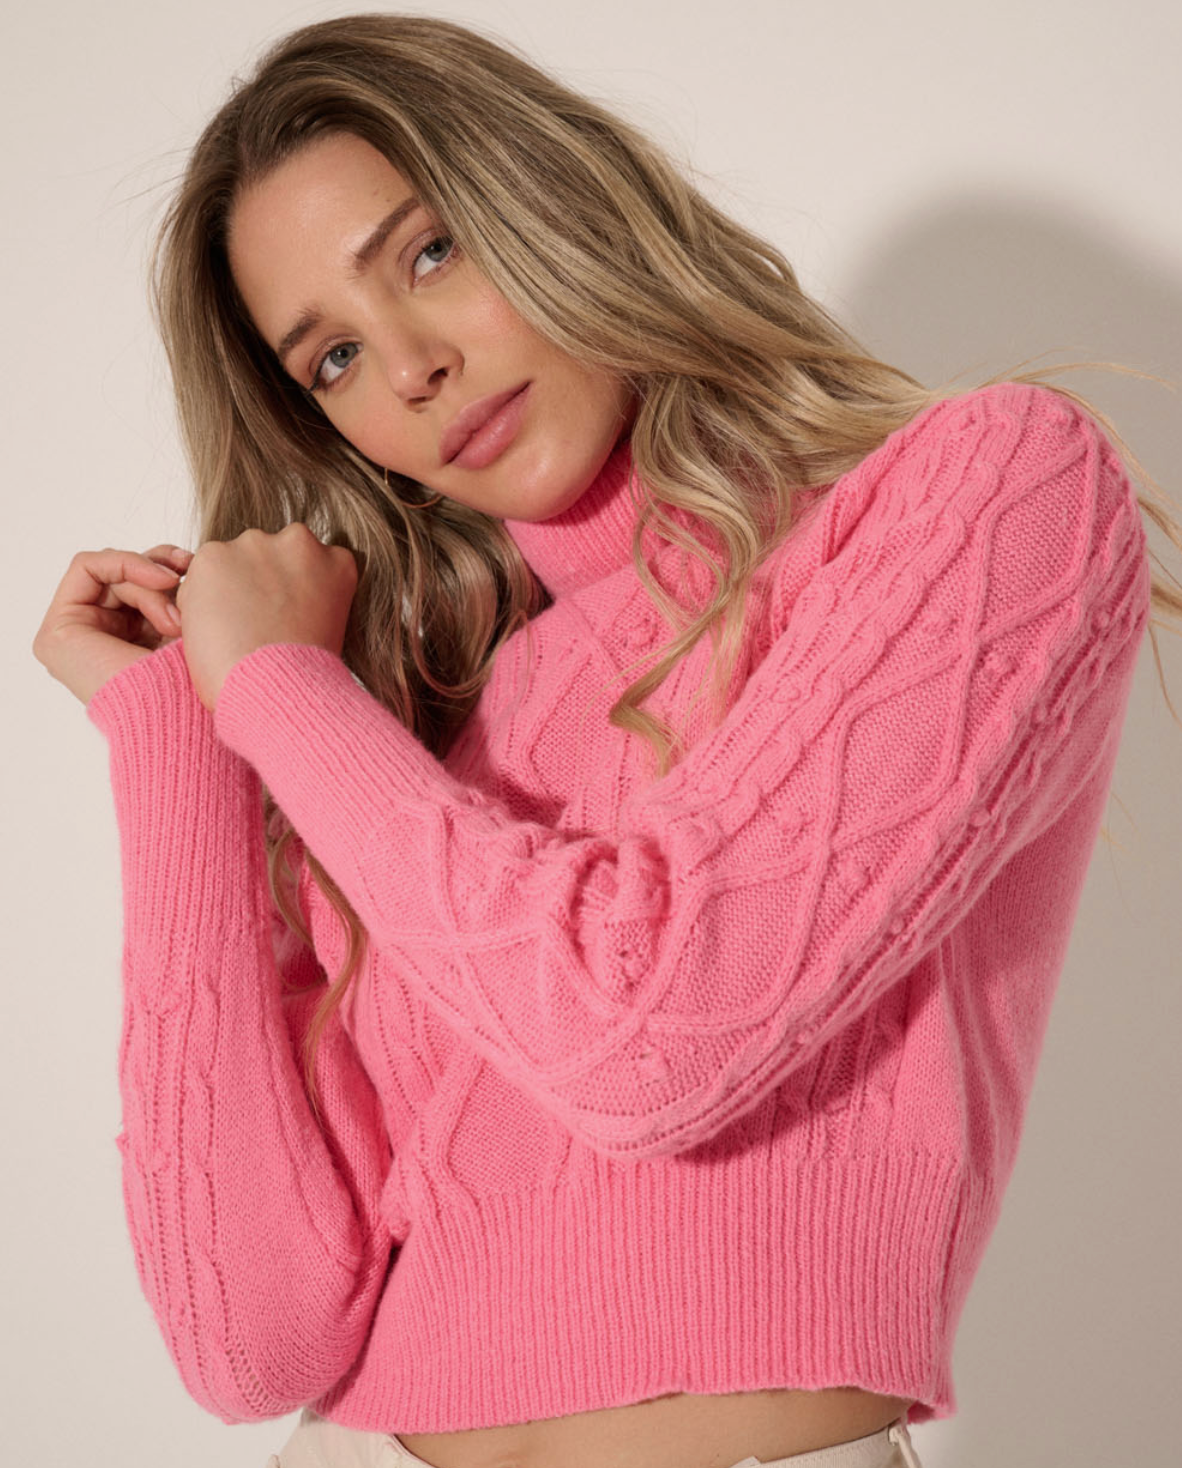 Simply In Love Cropped Sweater in Bubble Gum - The Street Boutique 